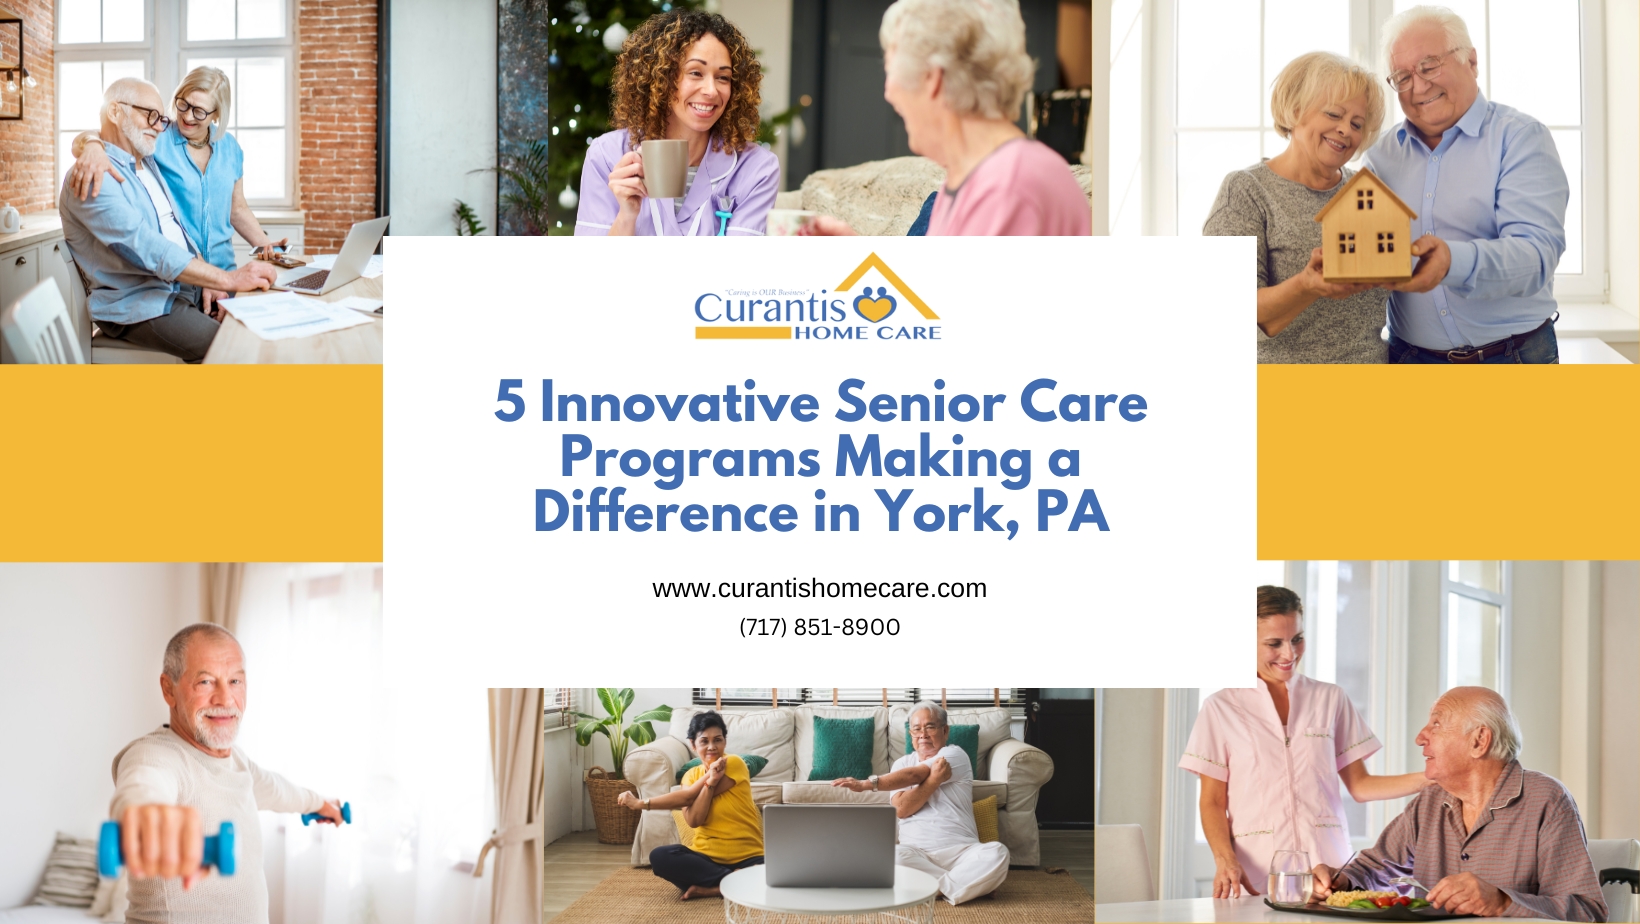 5 Innovative Senior Care Programs Making a Difference in York, PA